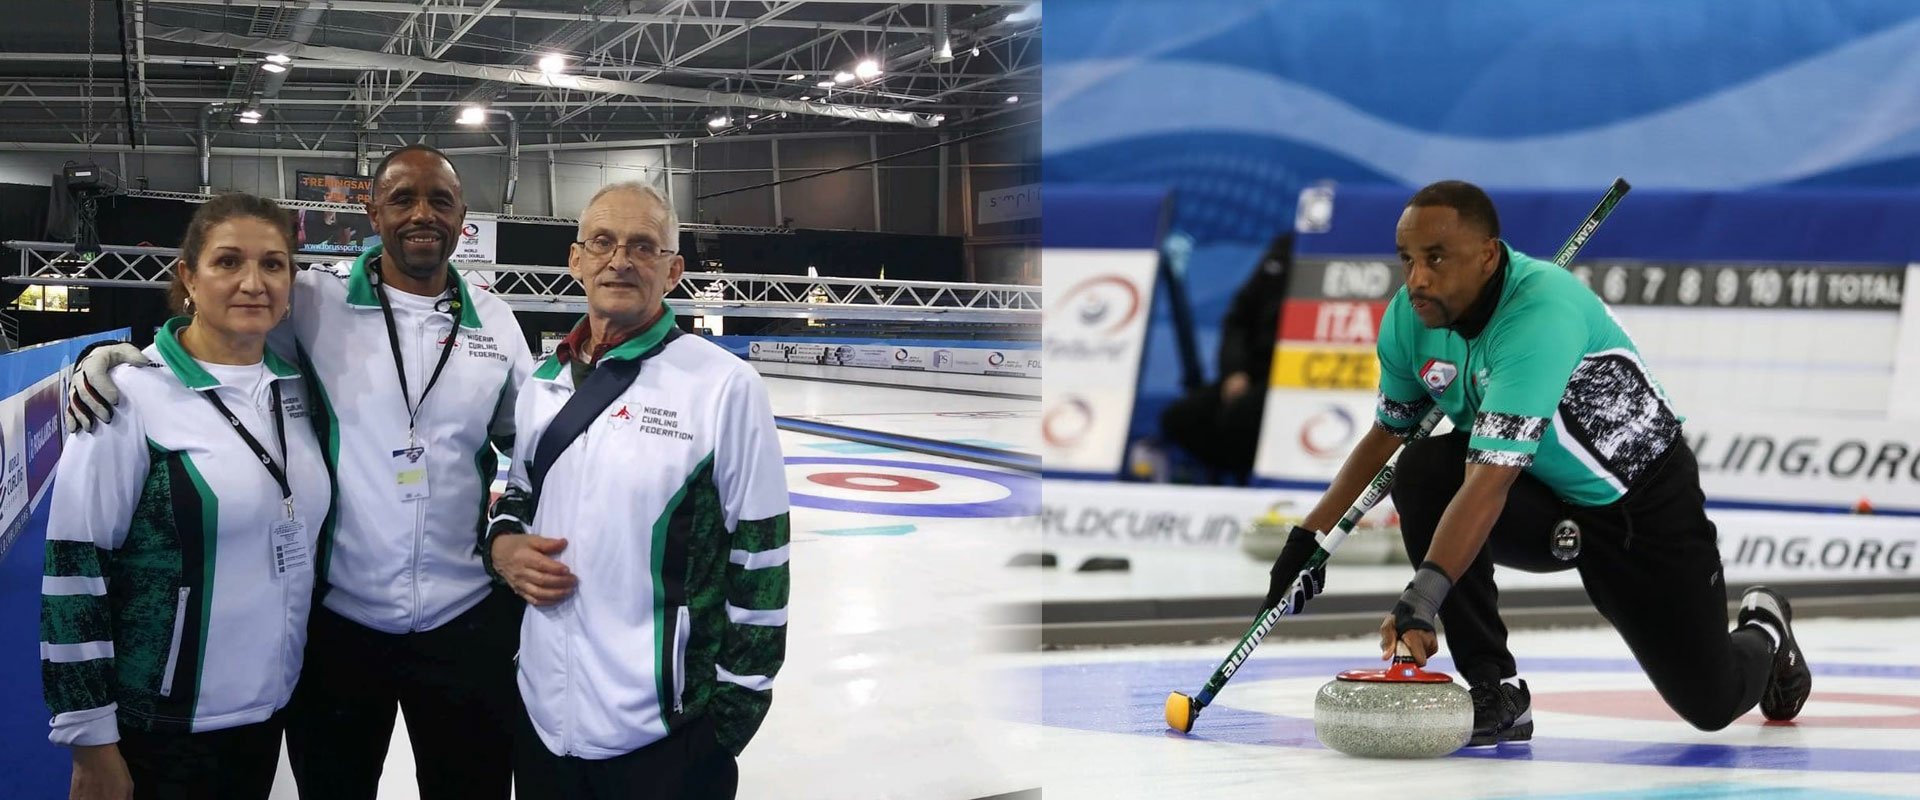 Nigeria On The Verge Of Making Another Great History In The World's Curling Game Championship